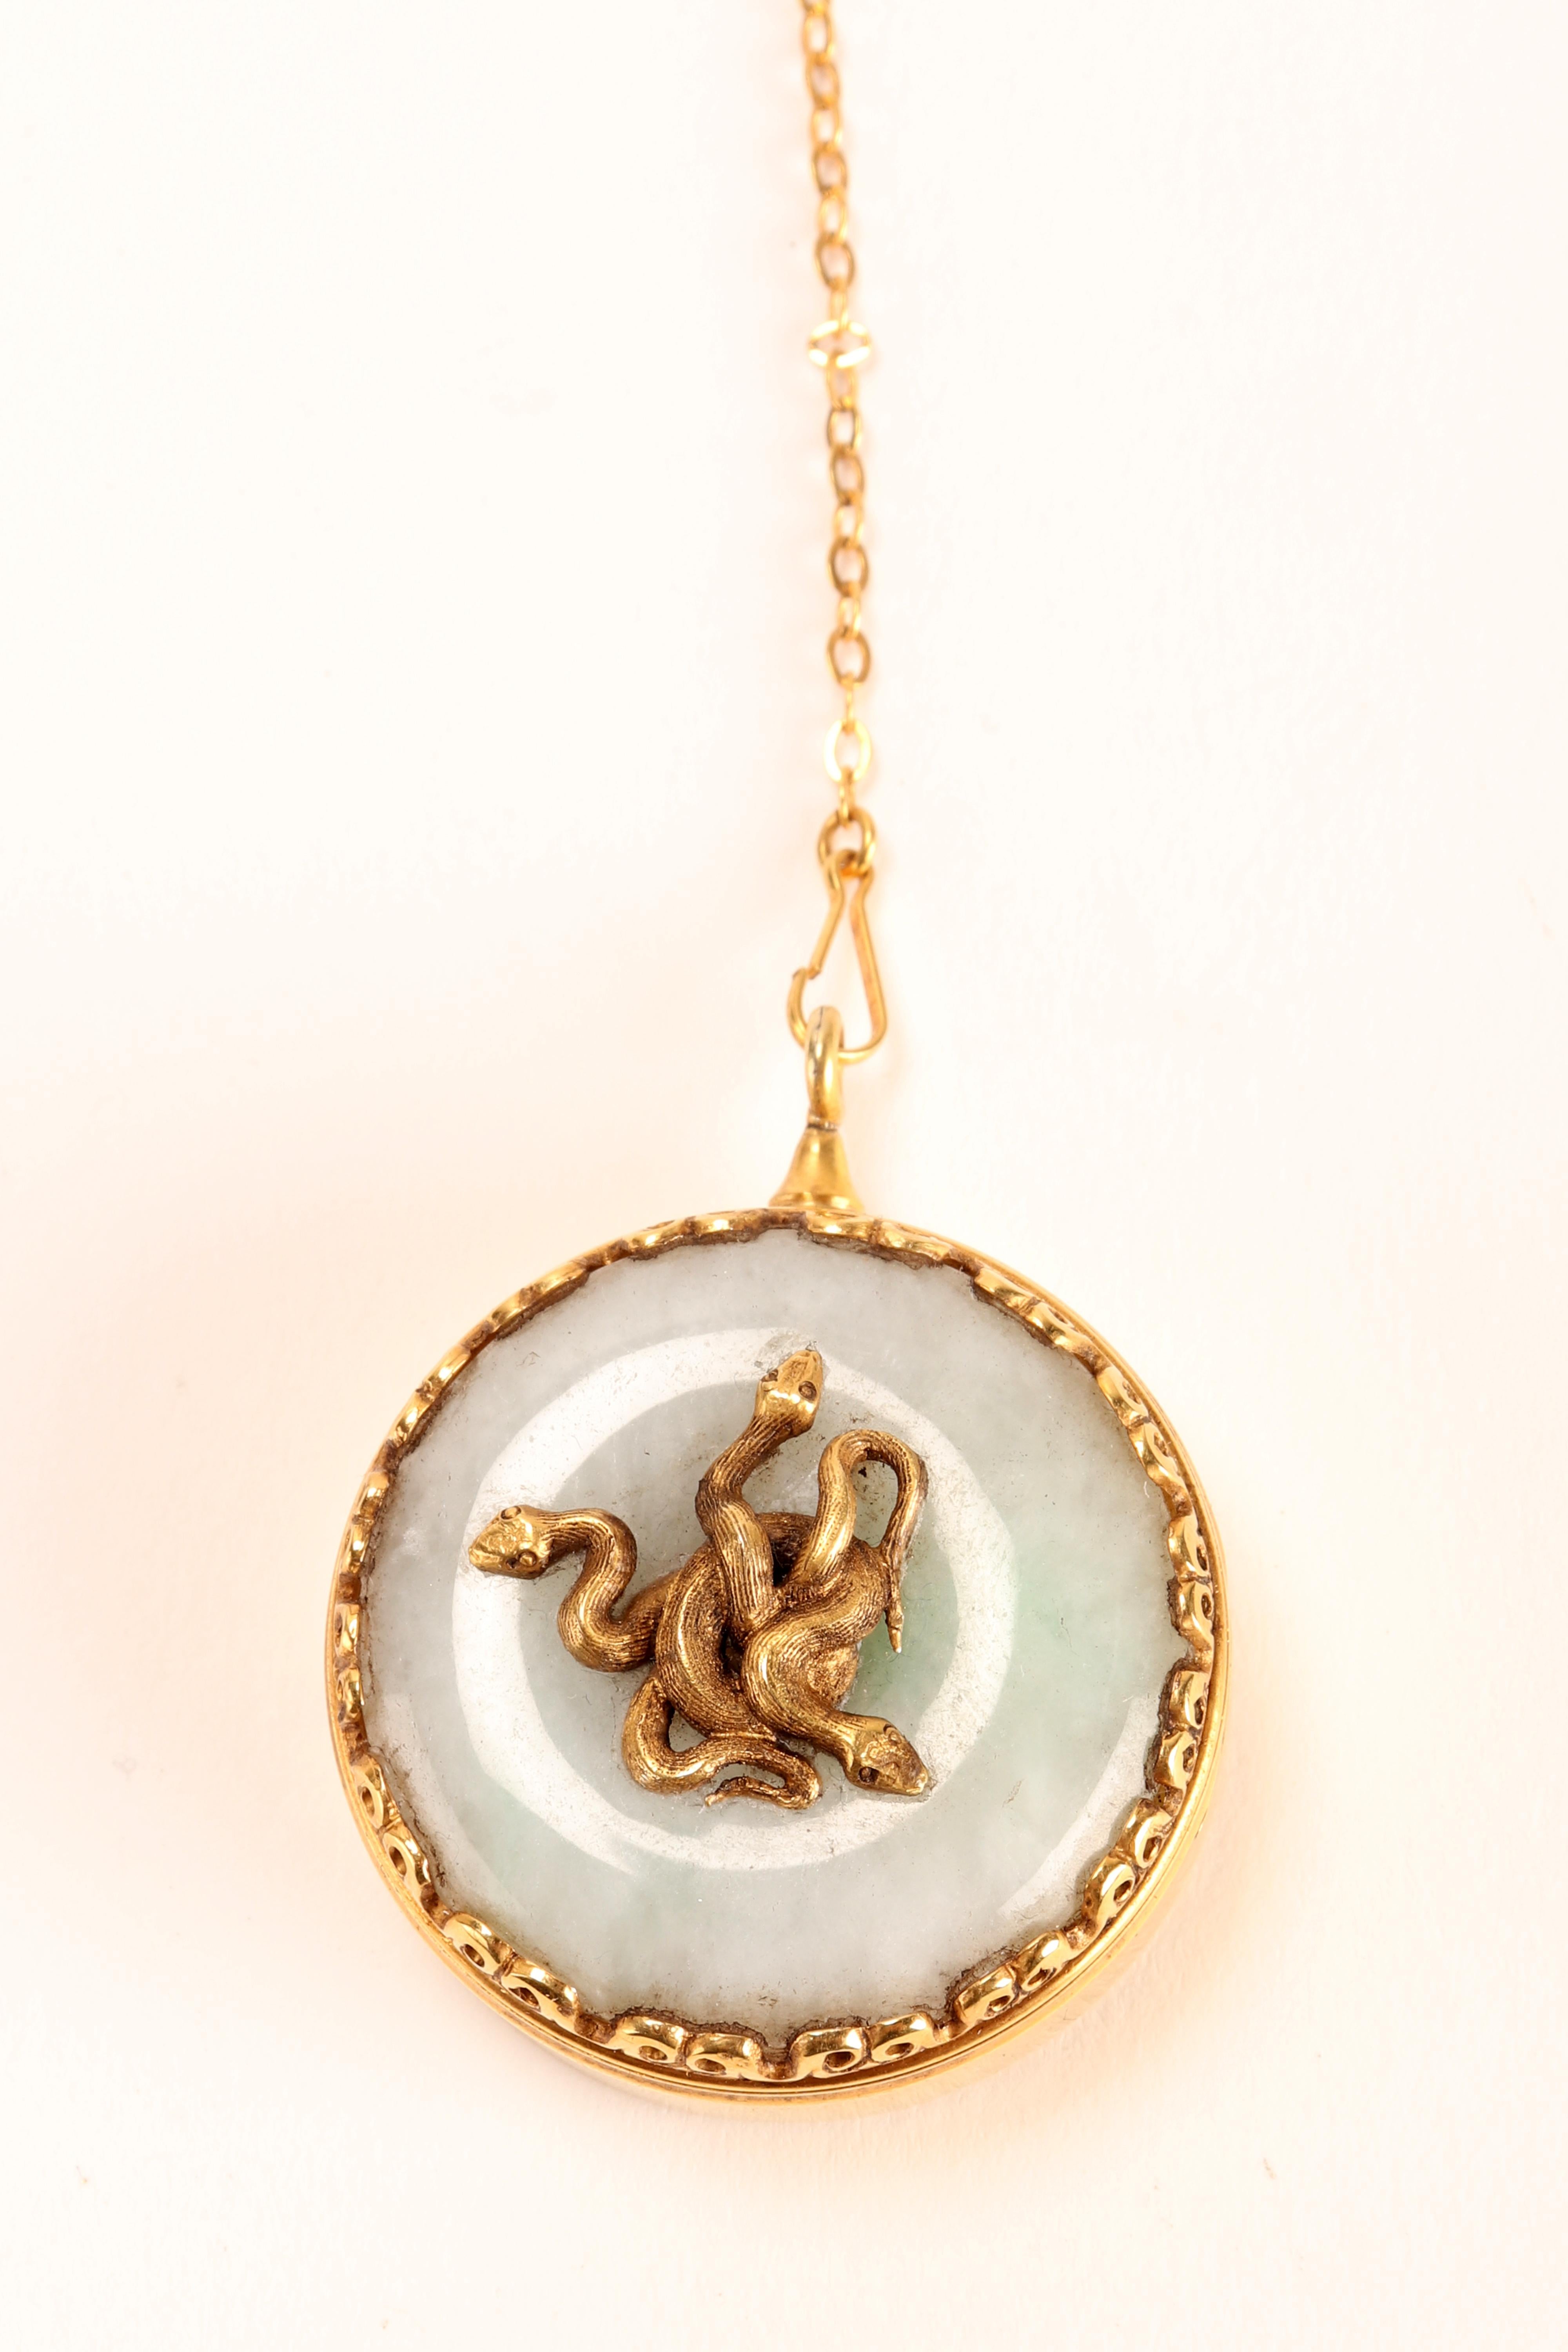 Round Art nouveau Vinaigrette, made of 18K gold. Configured as a pendant with safety lock.The lid of the box is in white jade with in the center several coiled snakes that also invade the inside of the lid. Marks: eagle head and goldsmith's mark